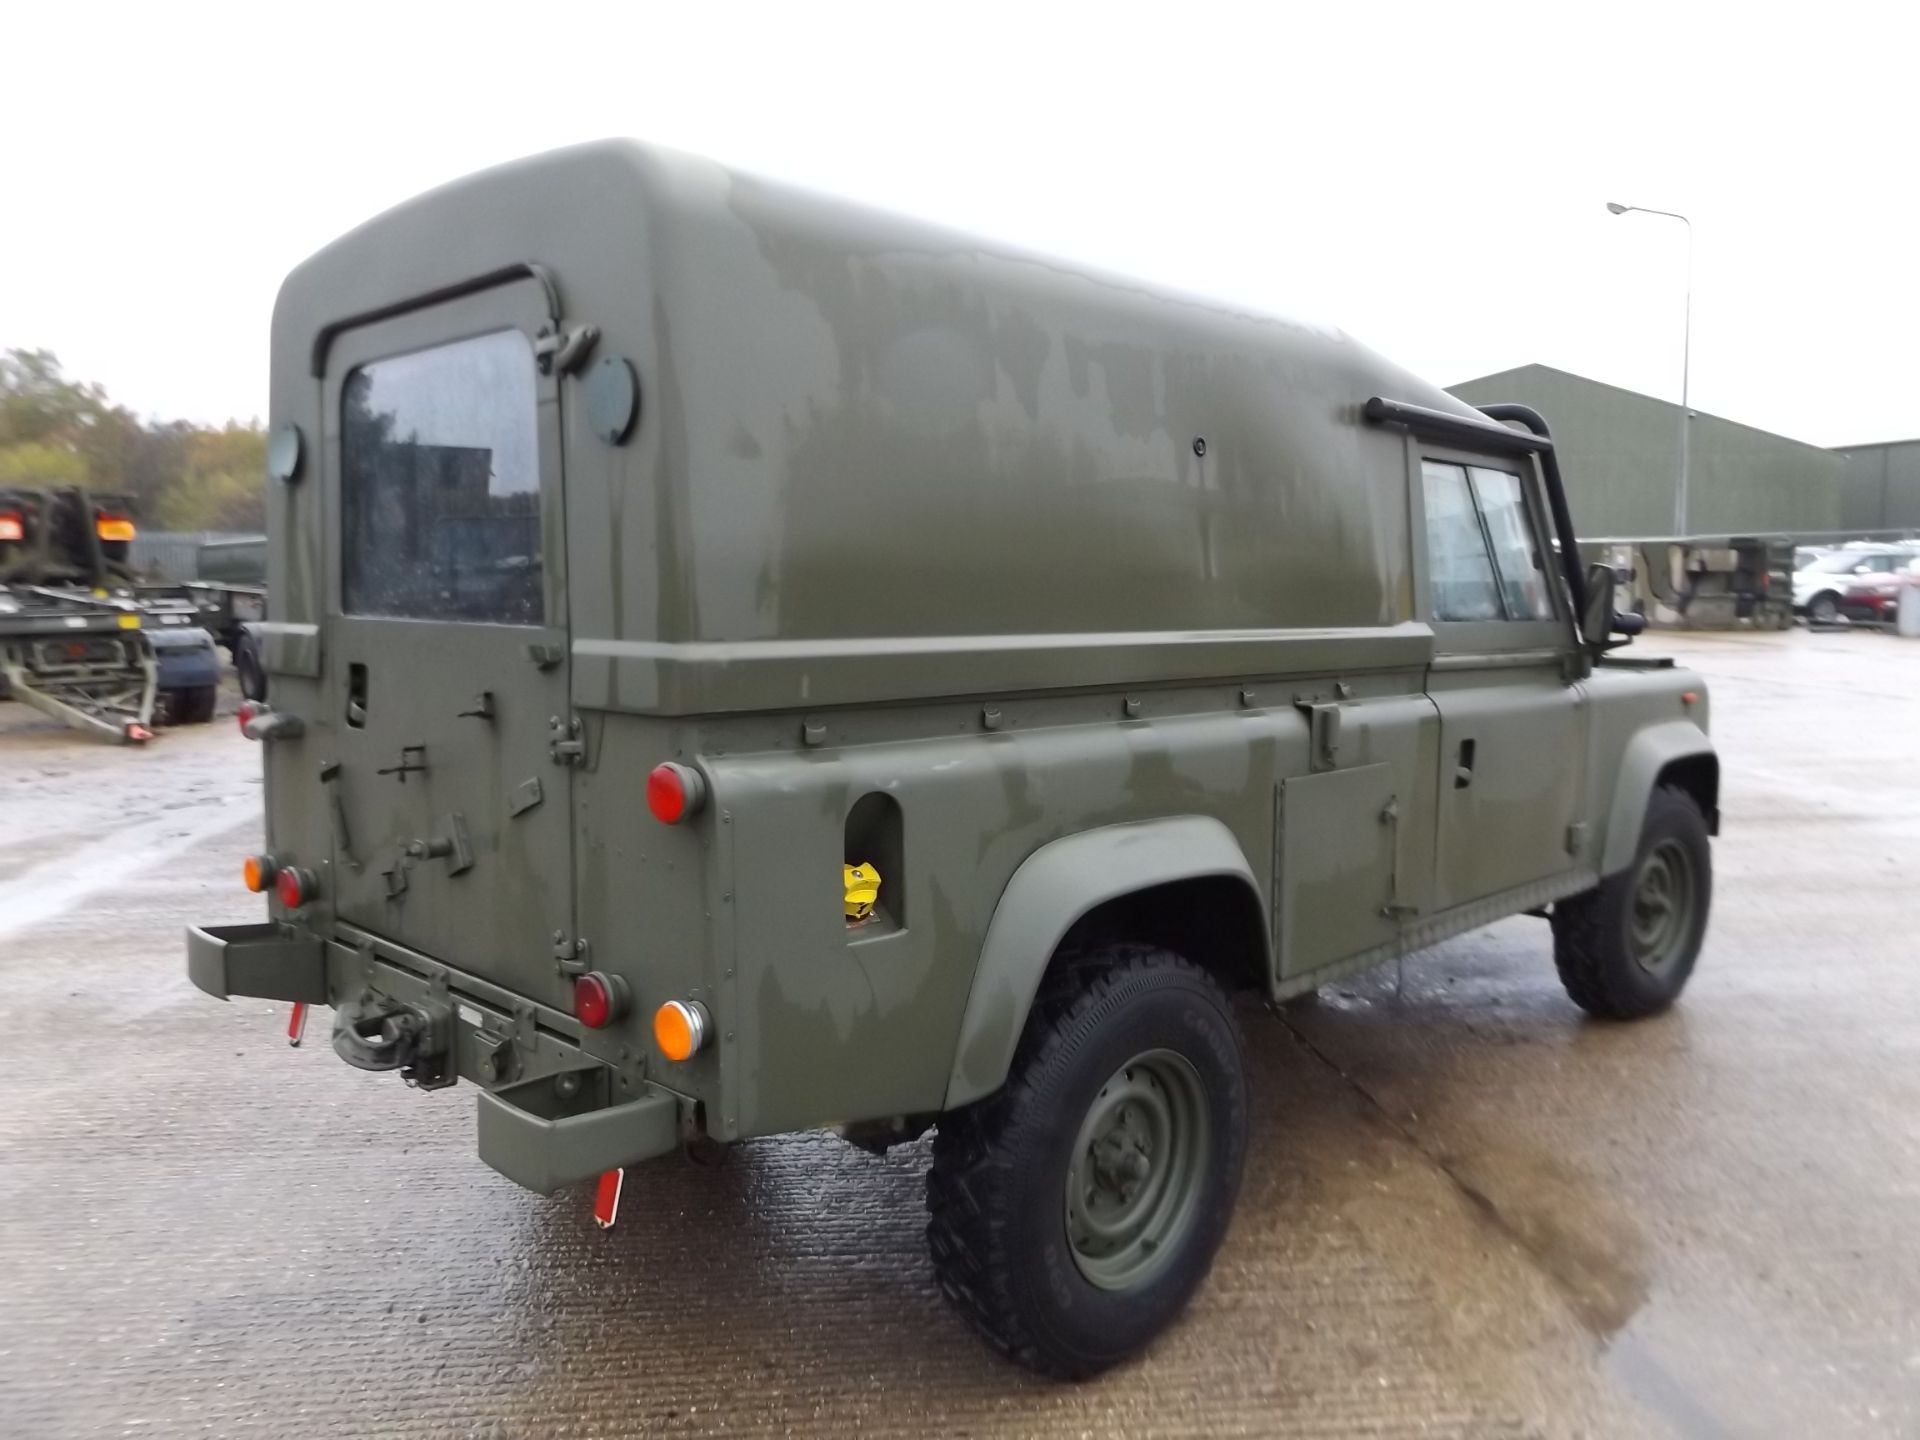 LHD Land Rover TITHONUS 110 Hard Top - Image 8 of 16